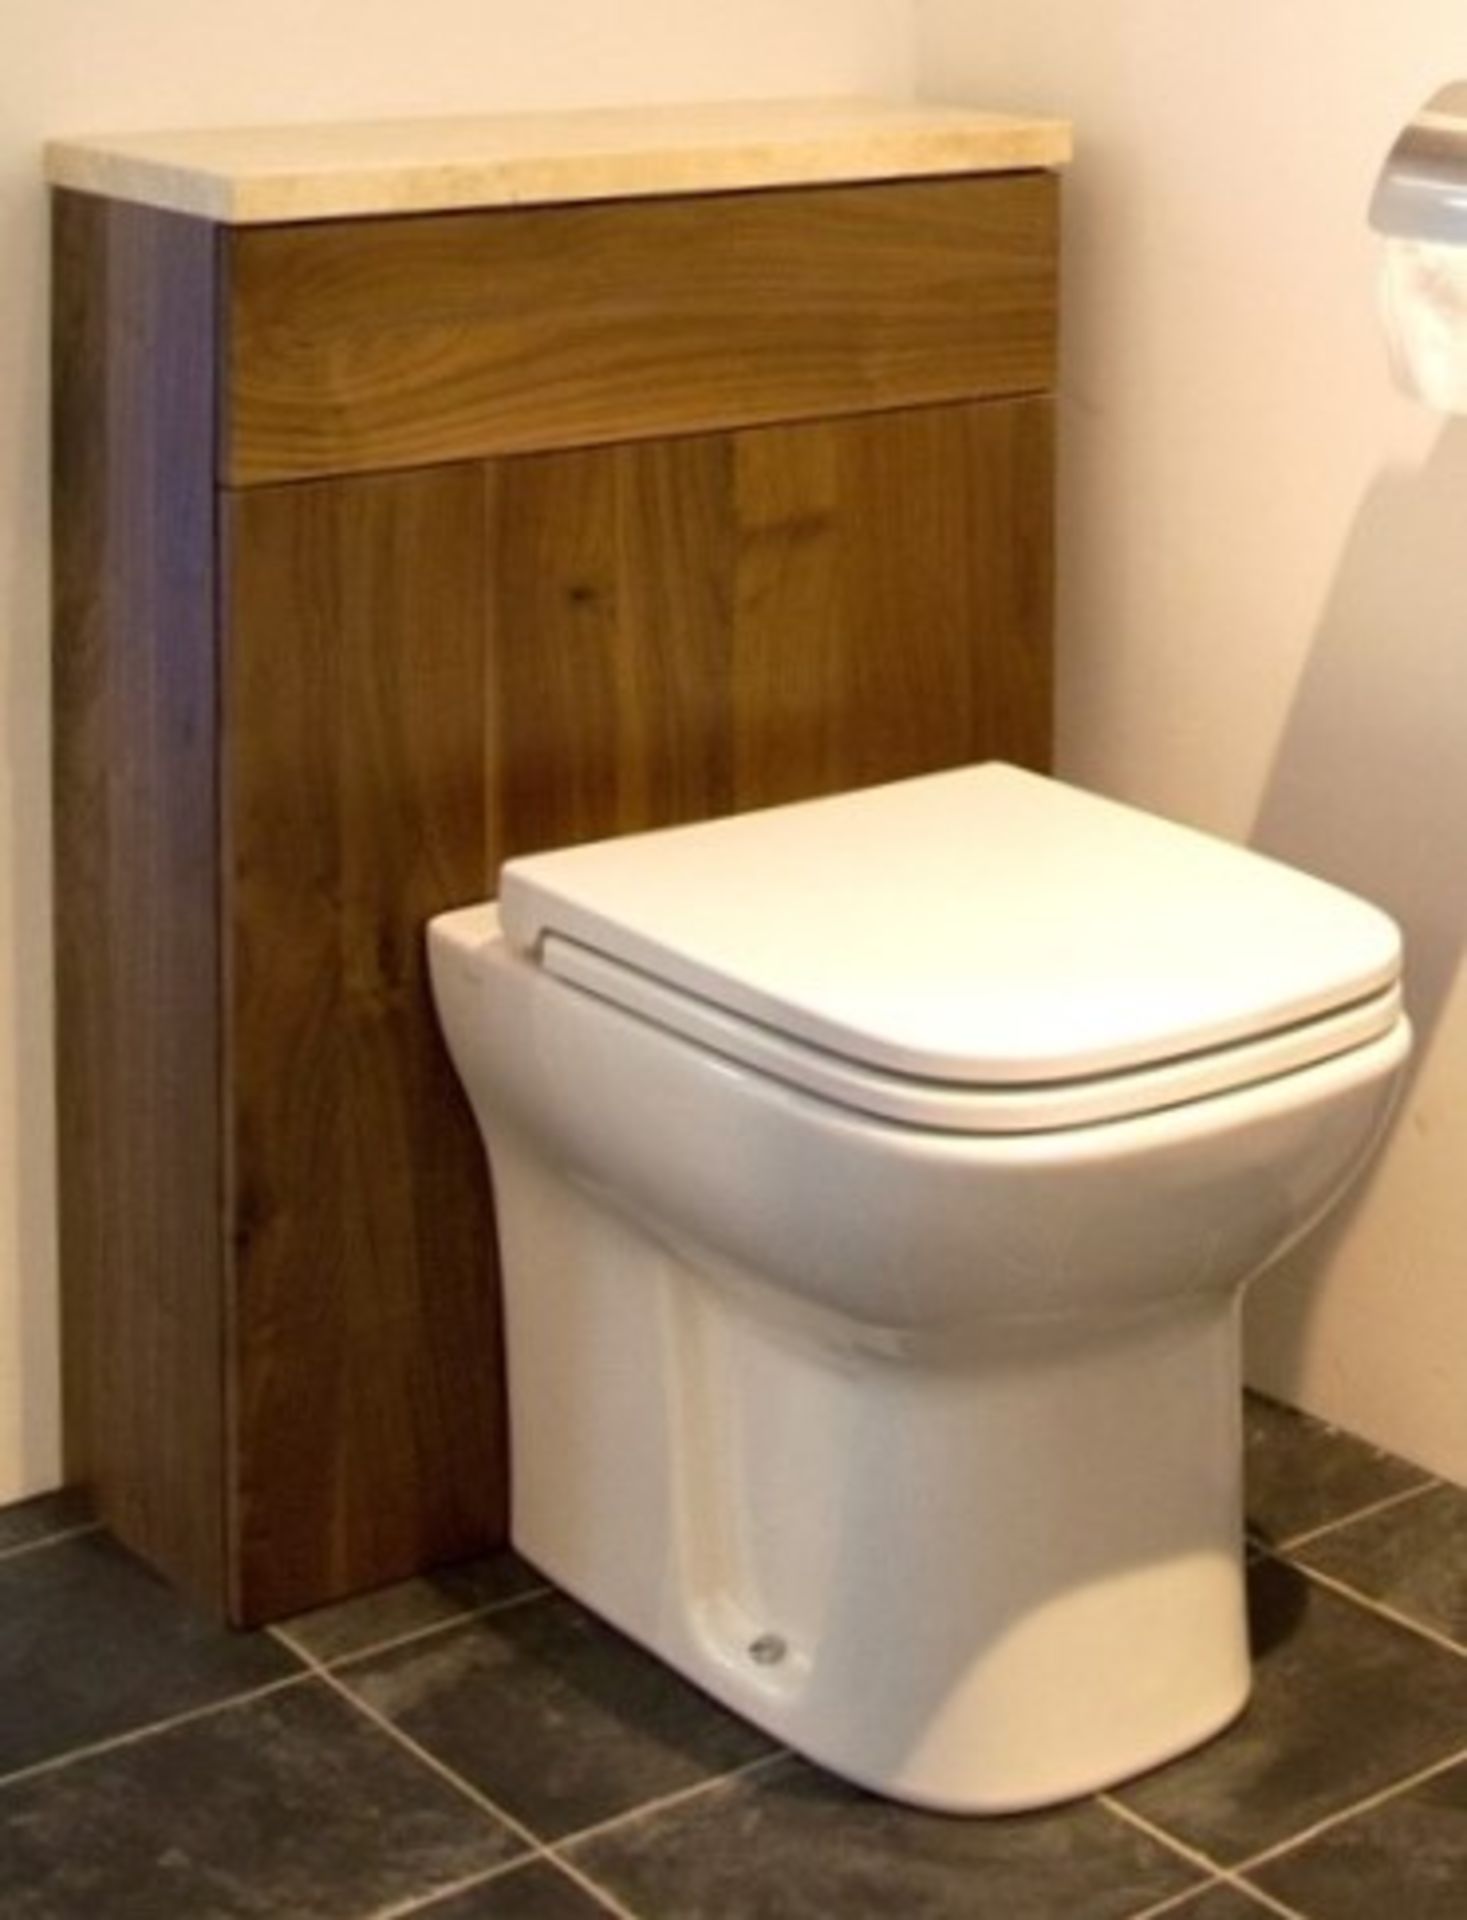 1 x Stonearth WC Toilet Unit With Marble Stone Cover - American Solid Walnut - Original RRP £888 - Image 2 of 10